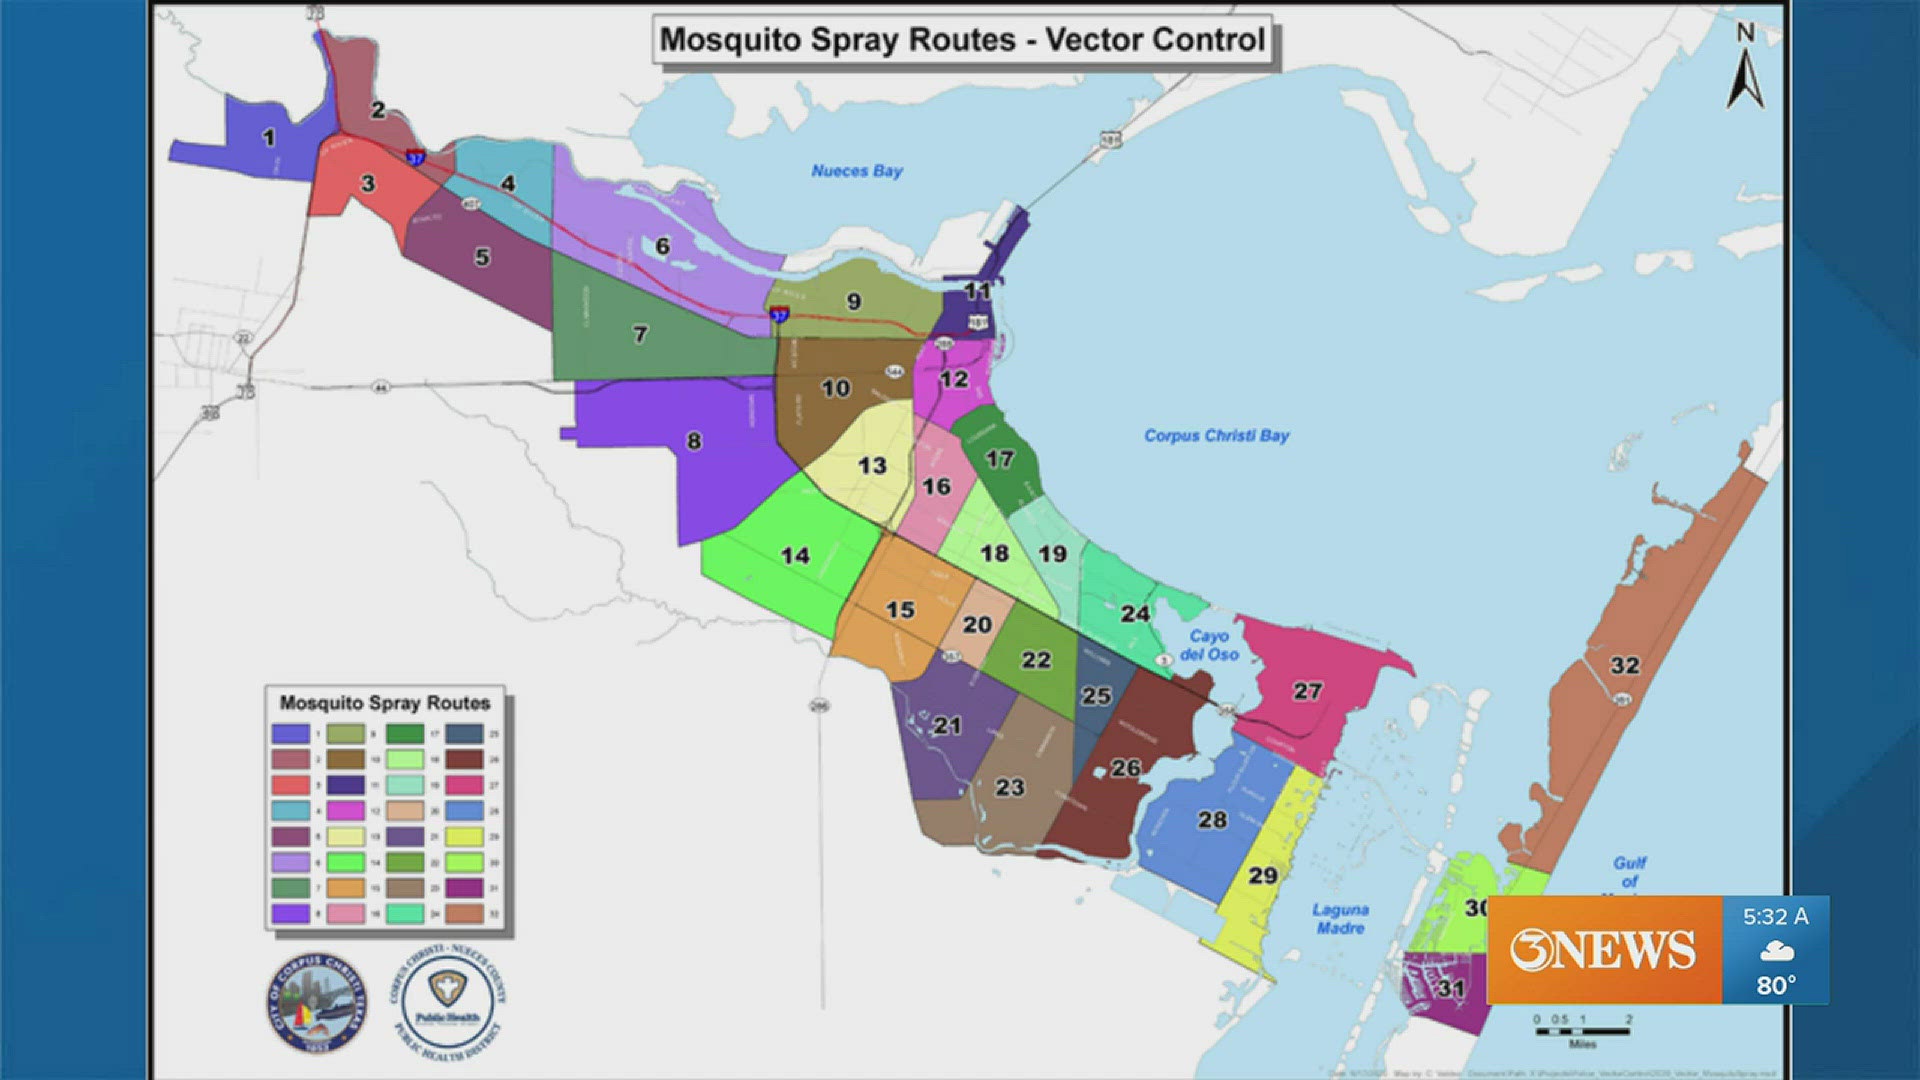 Vector control will be spraying for mosquitos throughout the city this week. Check out our story for details on the schedule.